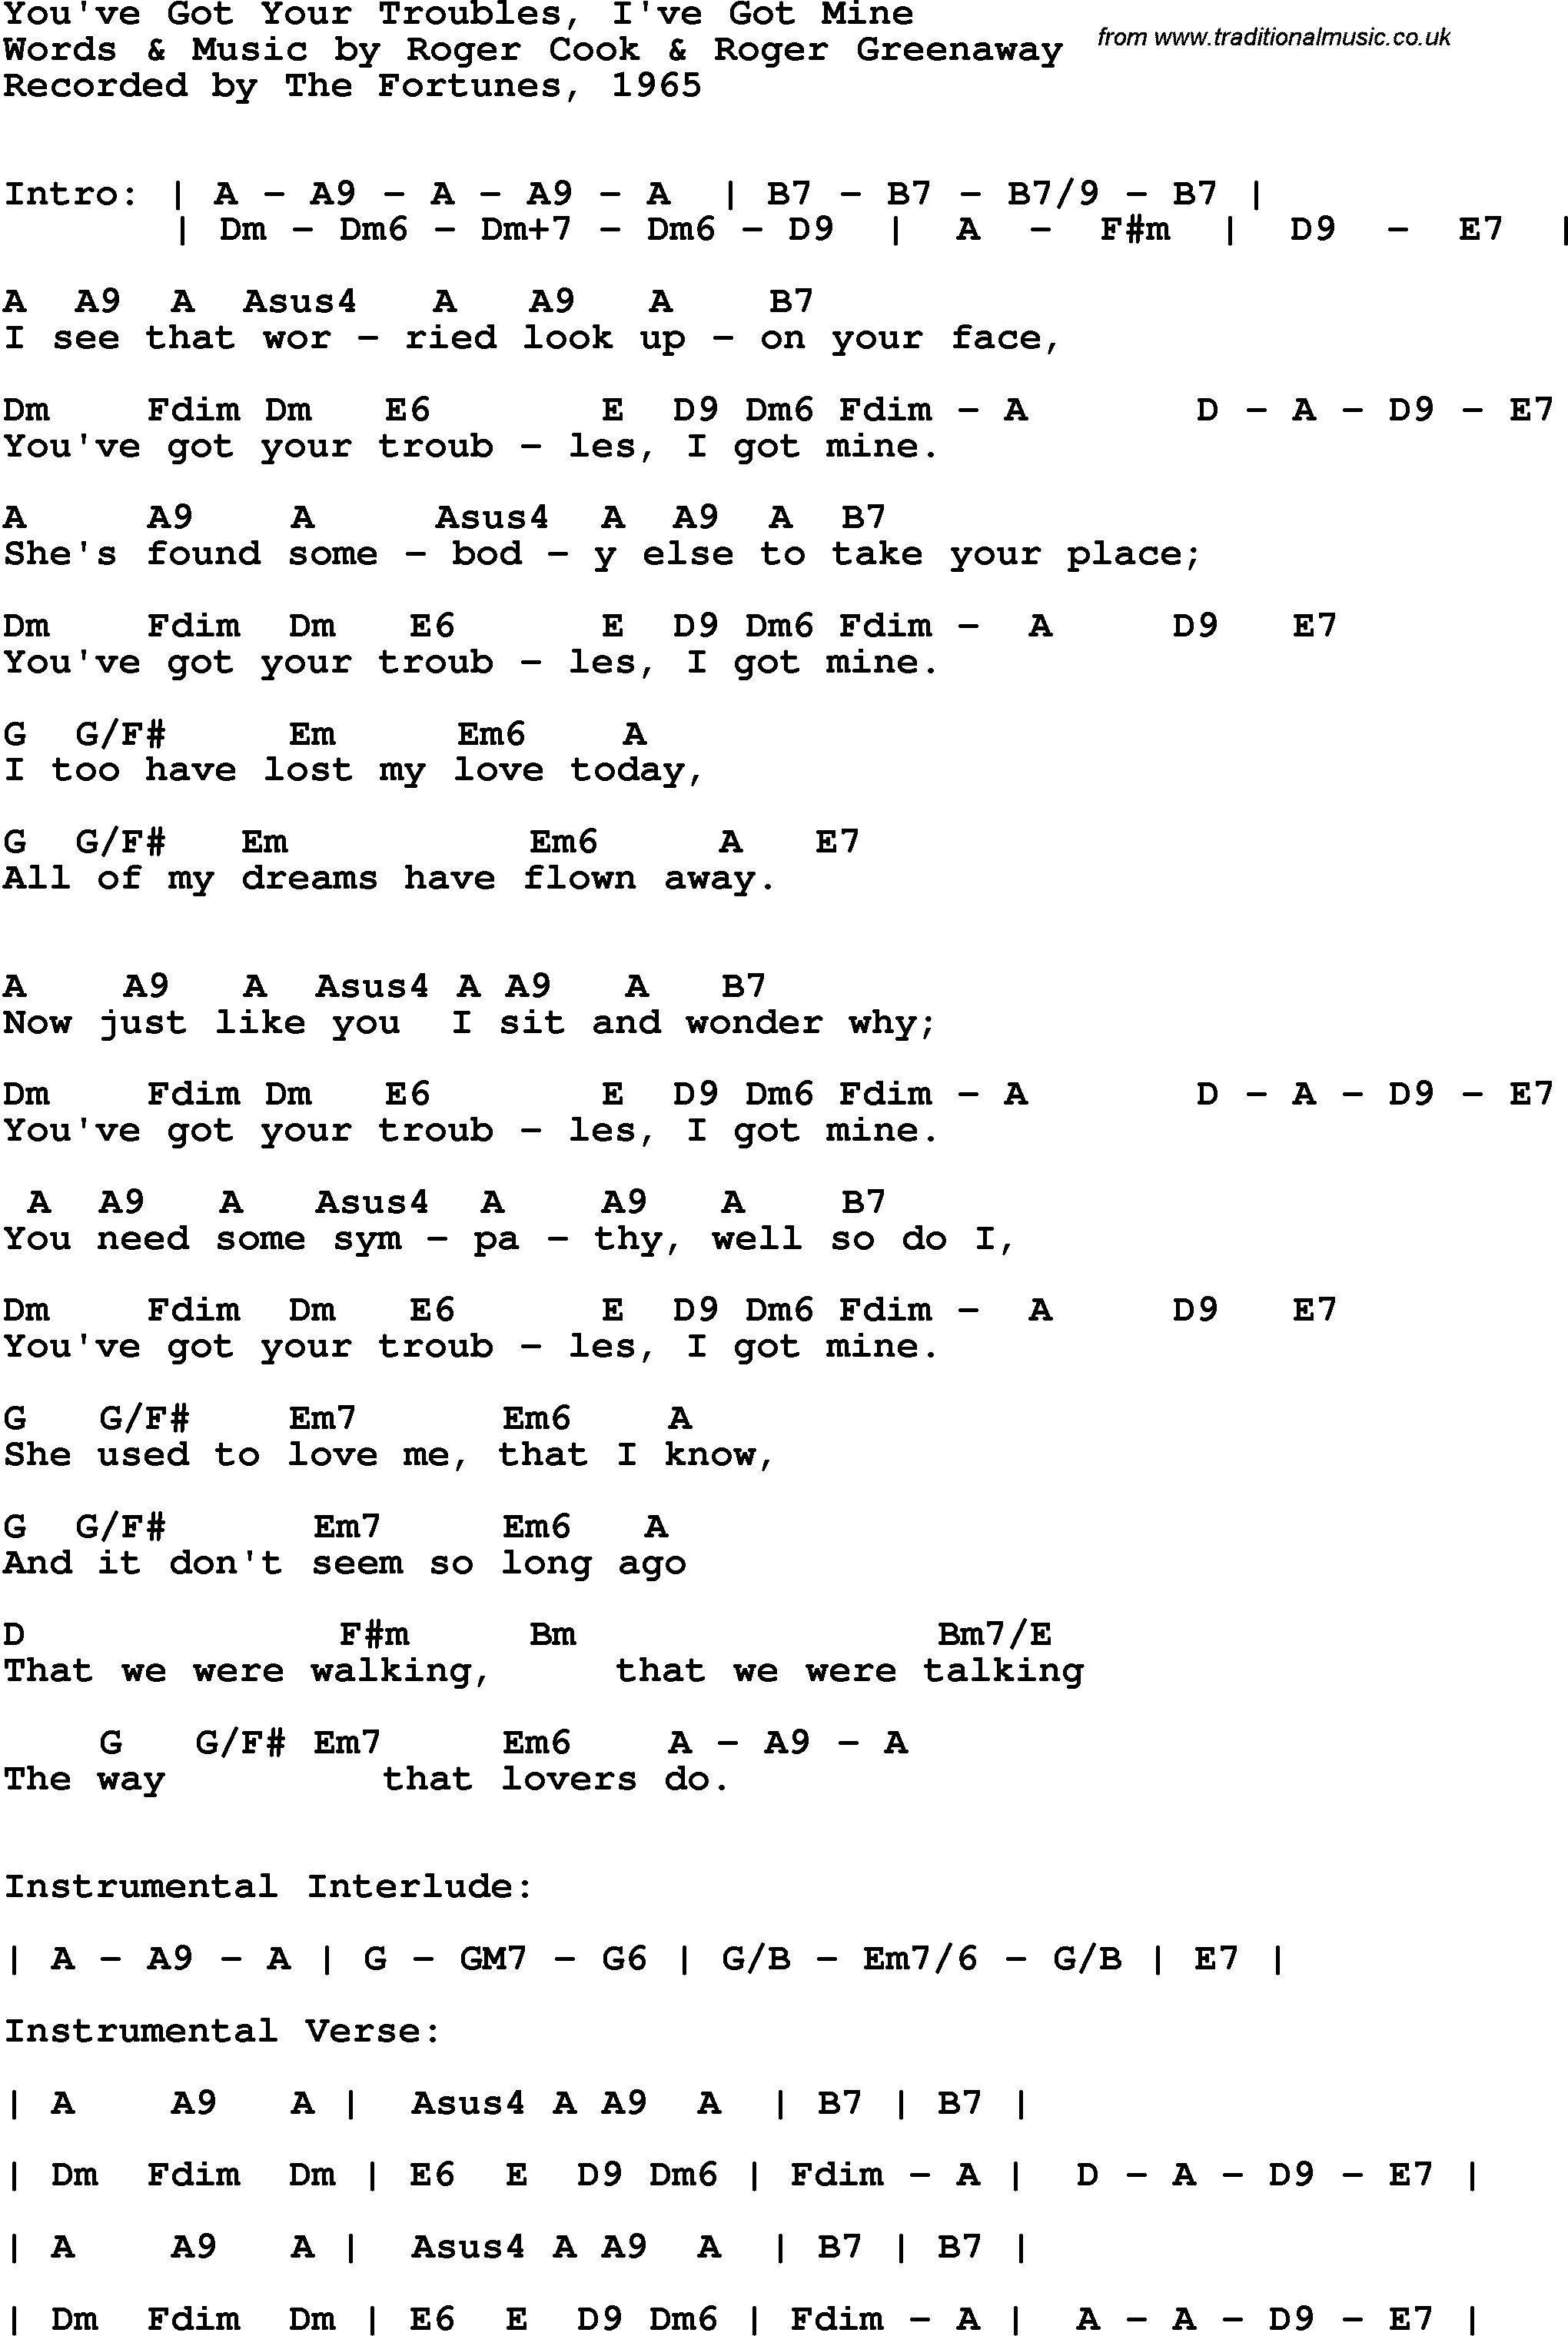 Song Lyrics with guitar chords for You've Got Your Troubles I've Got Mine - The Fortunes, 1965